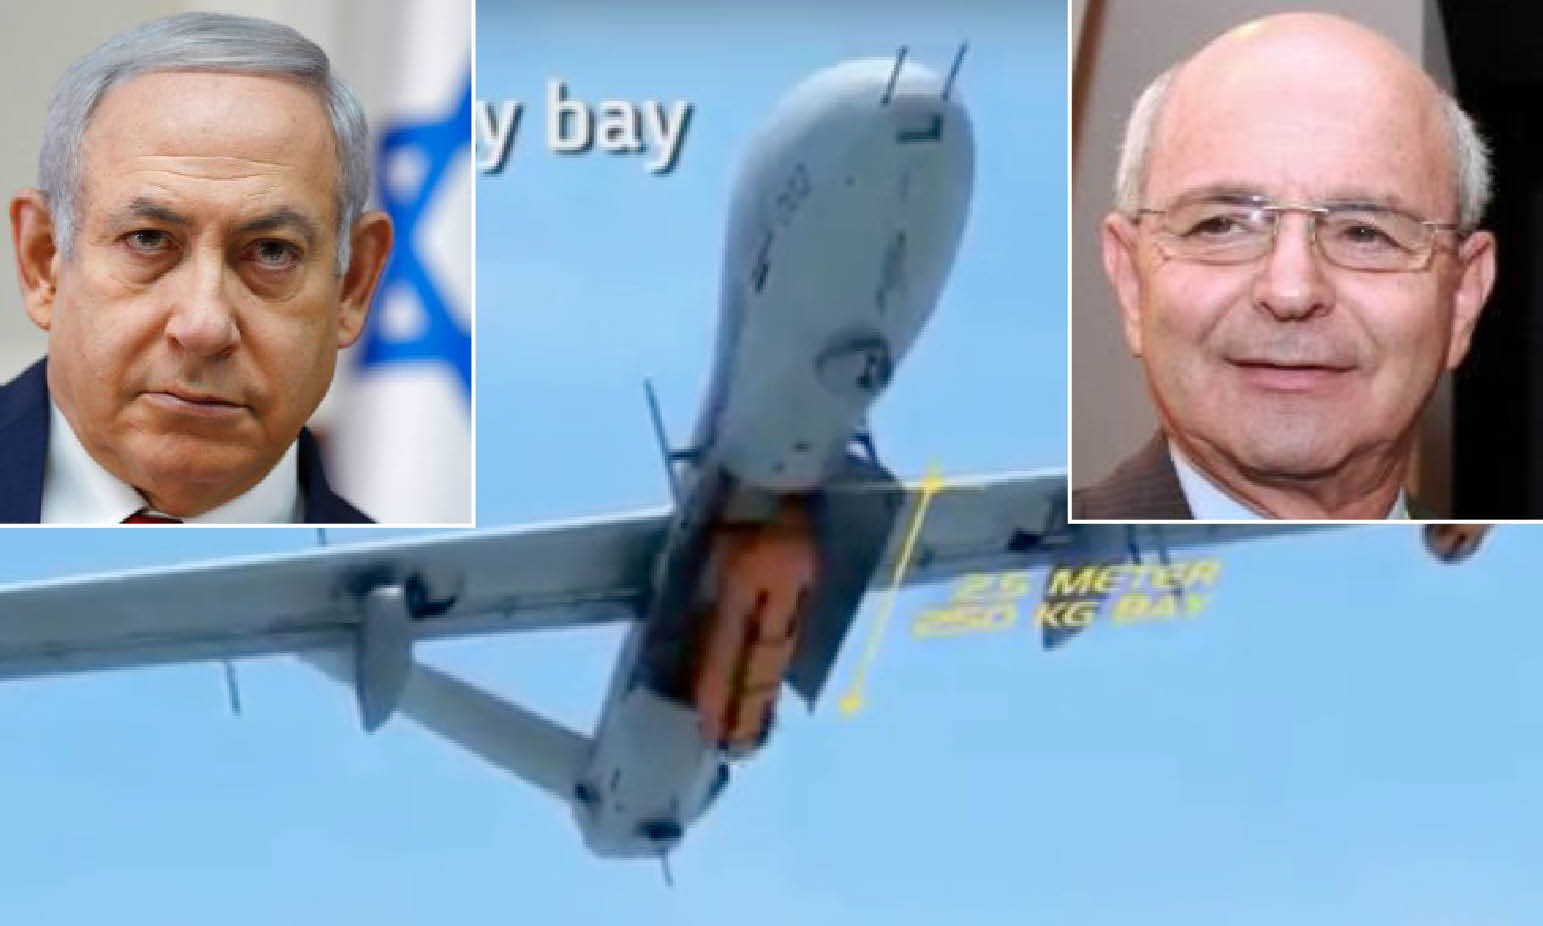 WEAPONS LOBBY – 3: THE ZIONIST KING OF DRONES AND MERCHANT OF DEATH